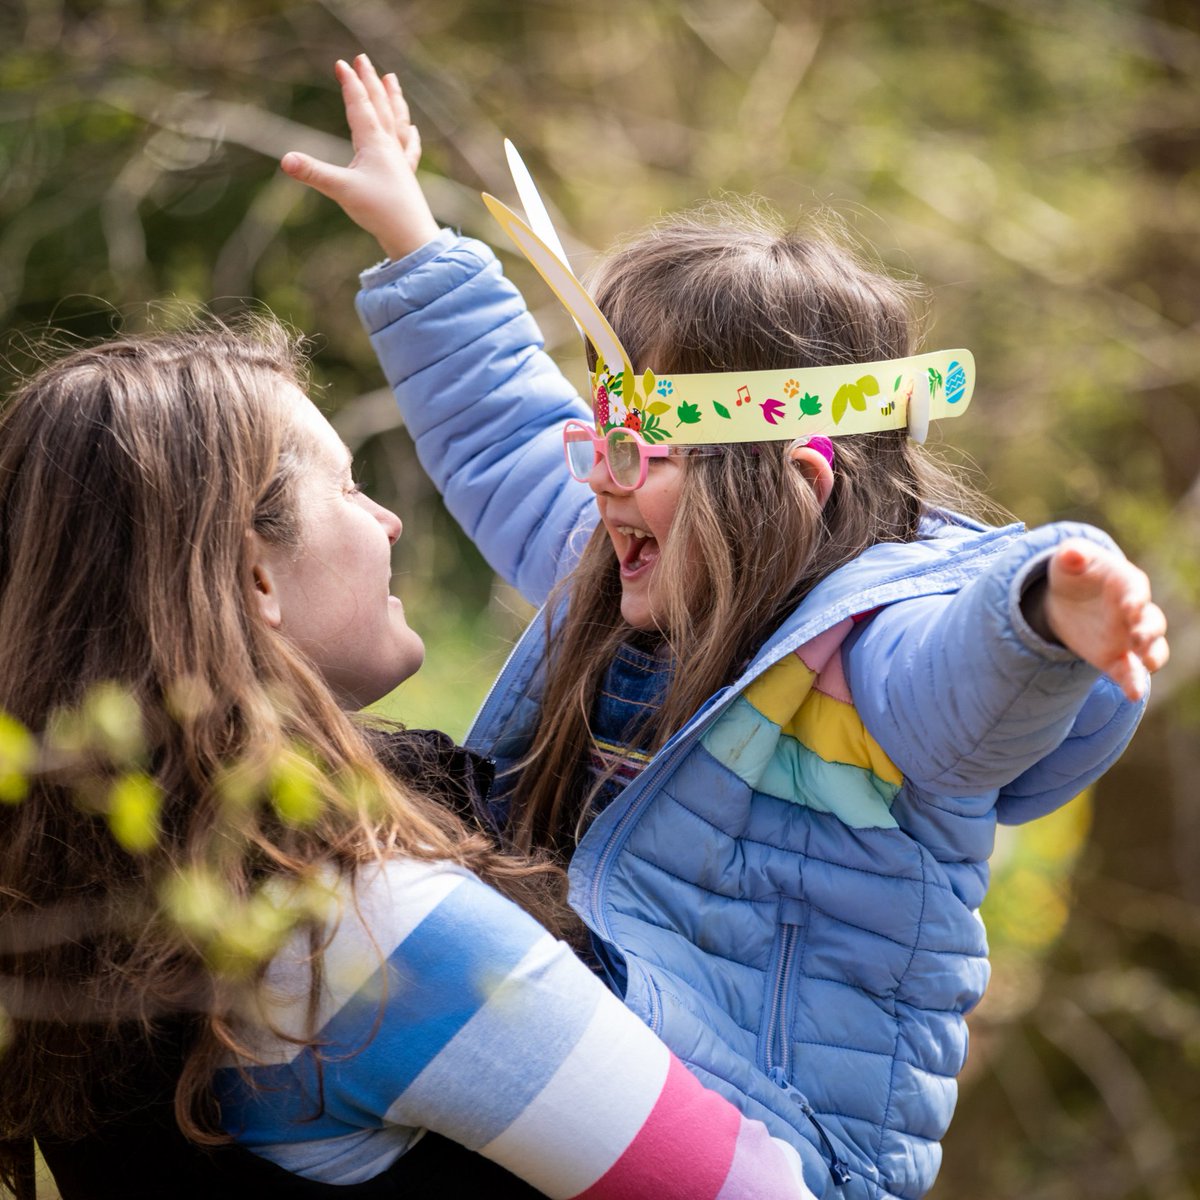 Make Easter something to shout about at #Longshaw this year. With 10 egg-citing activity stations located around Longshaw Estate, there's plenty to keep you and your family busy this Easter holiday. Find out more - tinyurl.com/55ssfke4